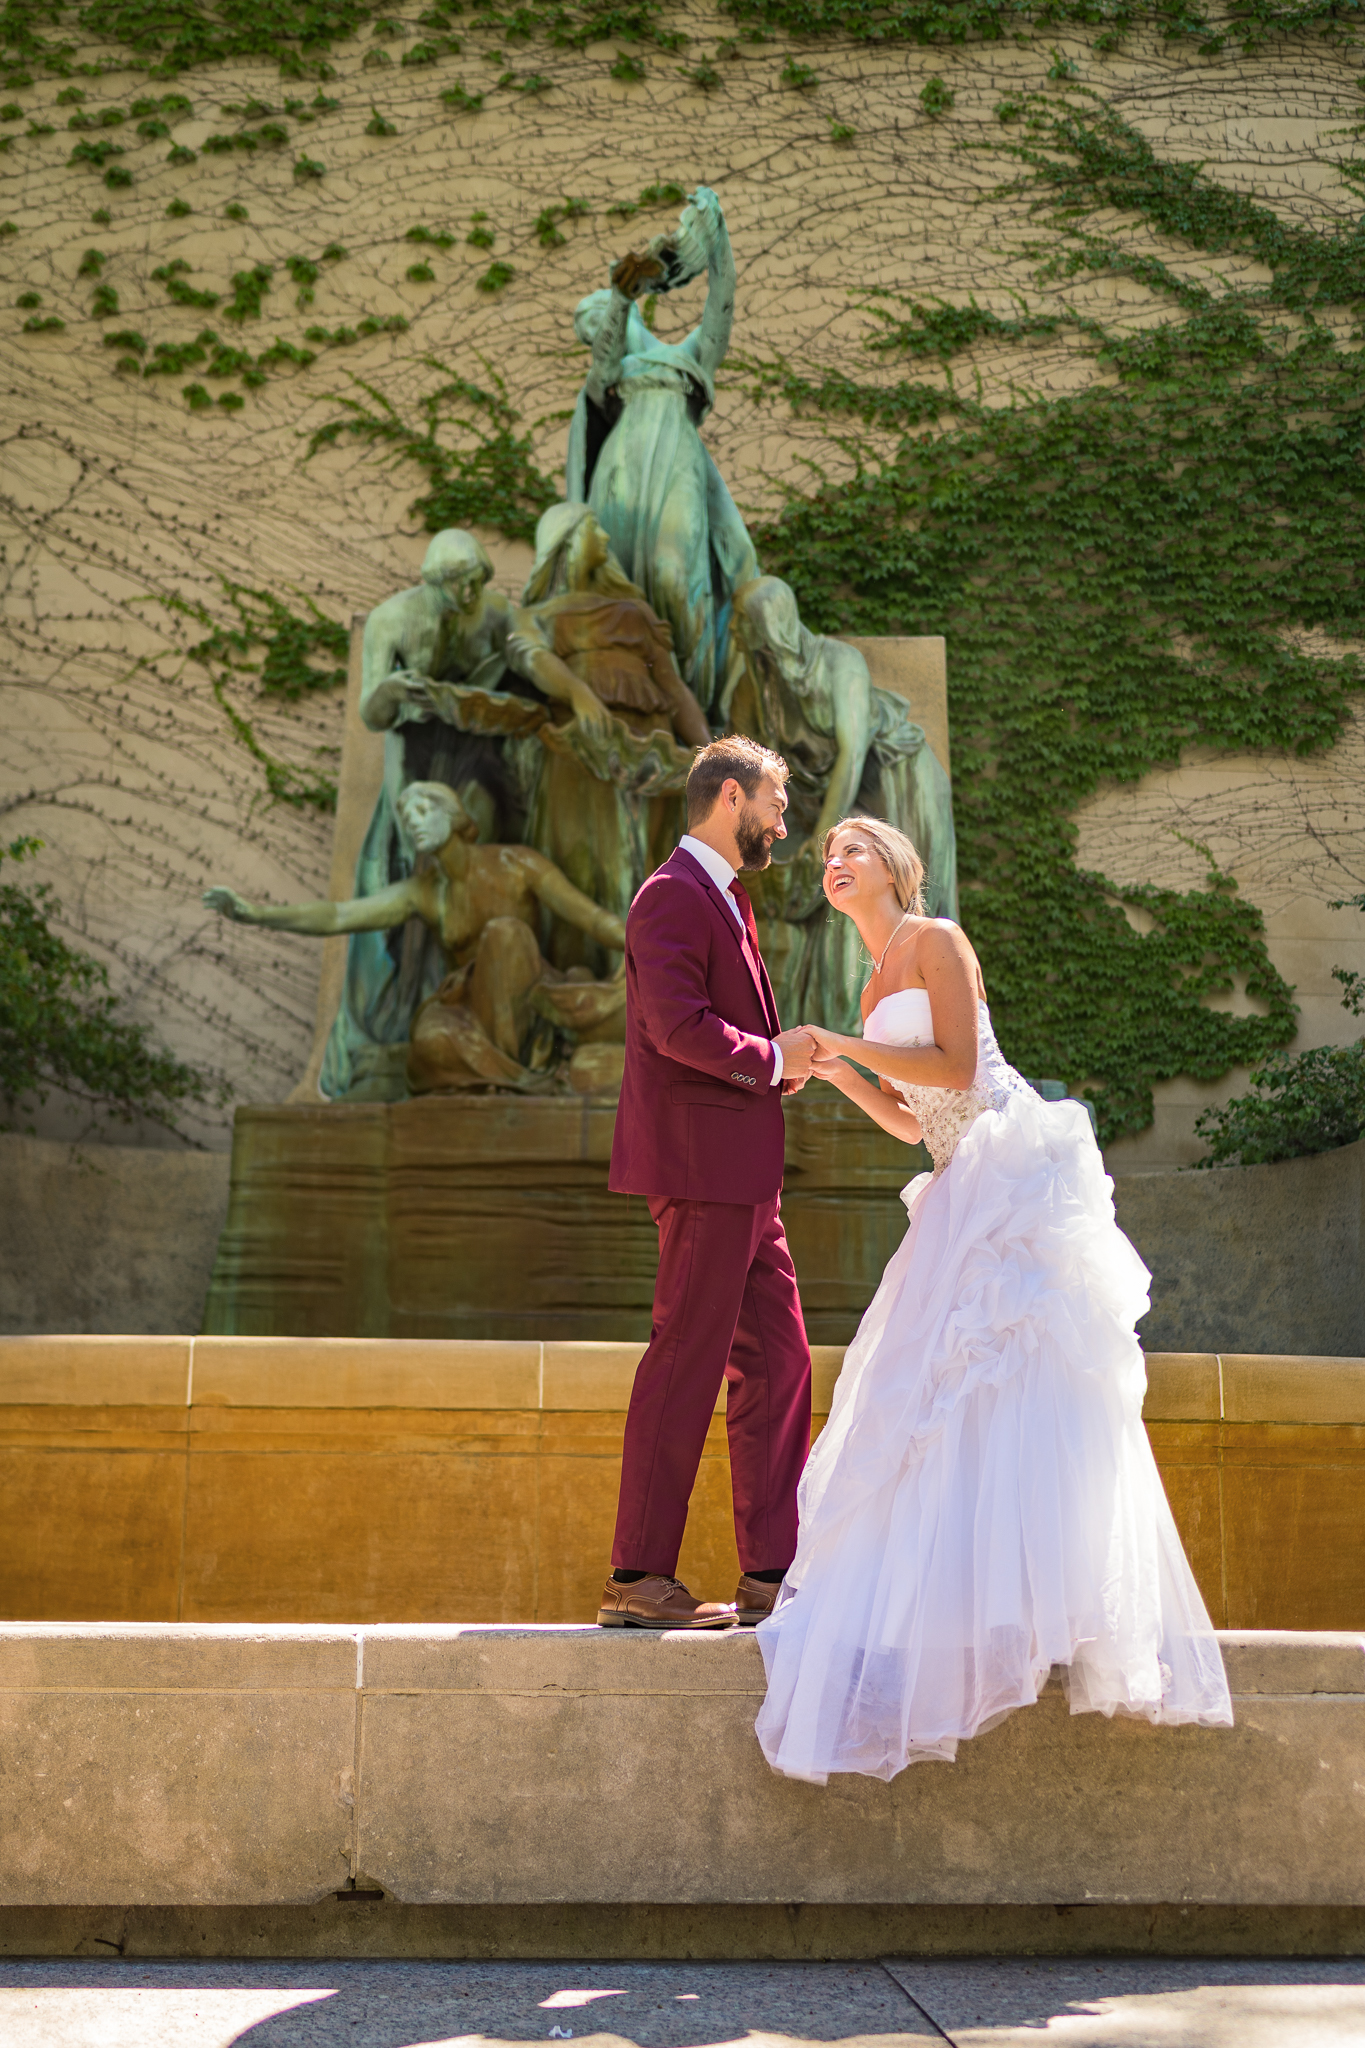 bride and groom laughing at outdoor wedding venues chicago